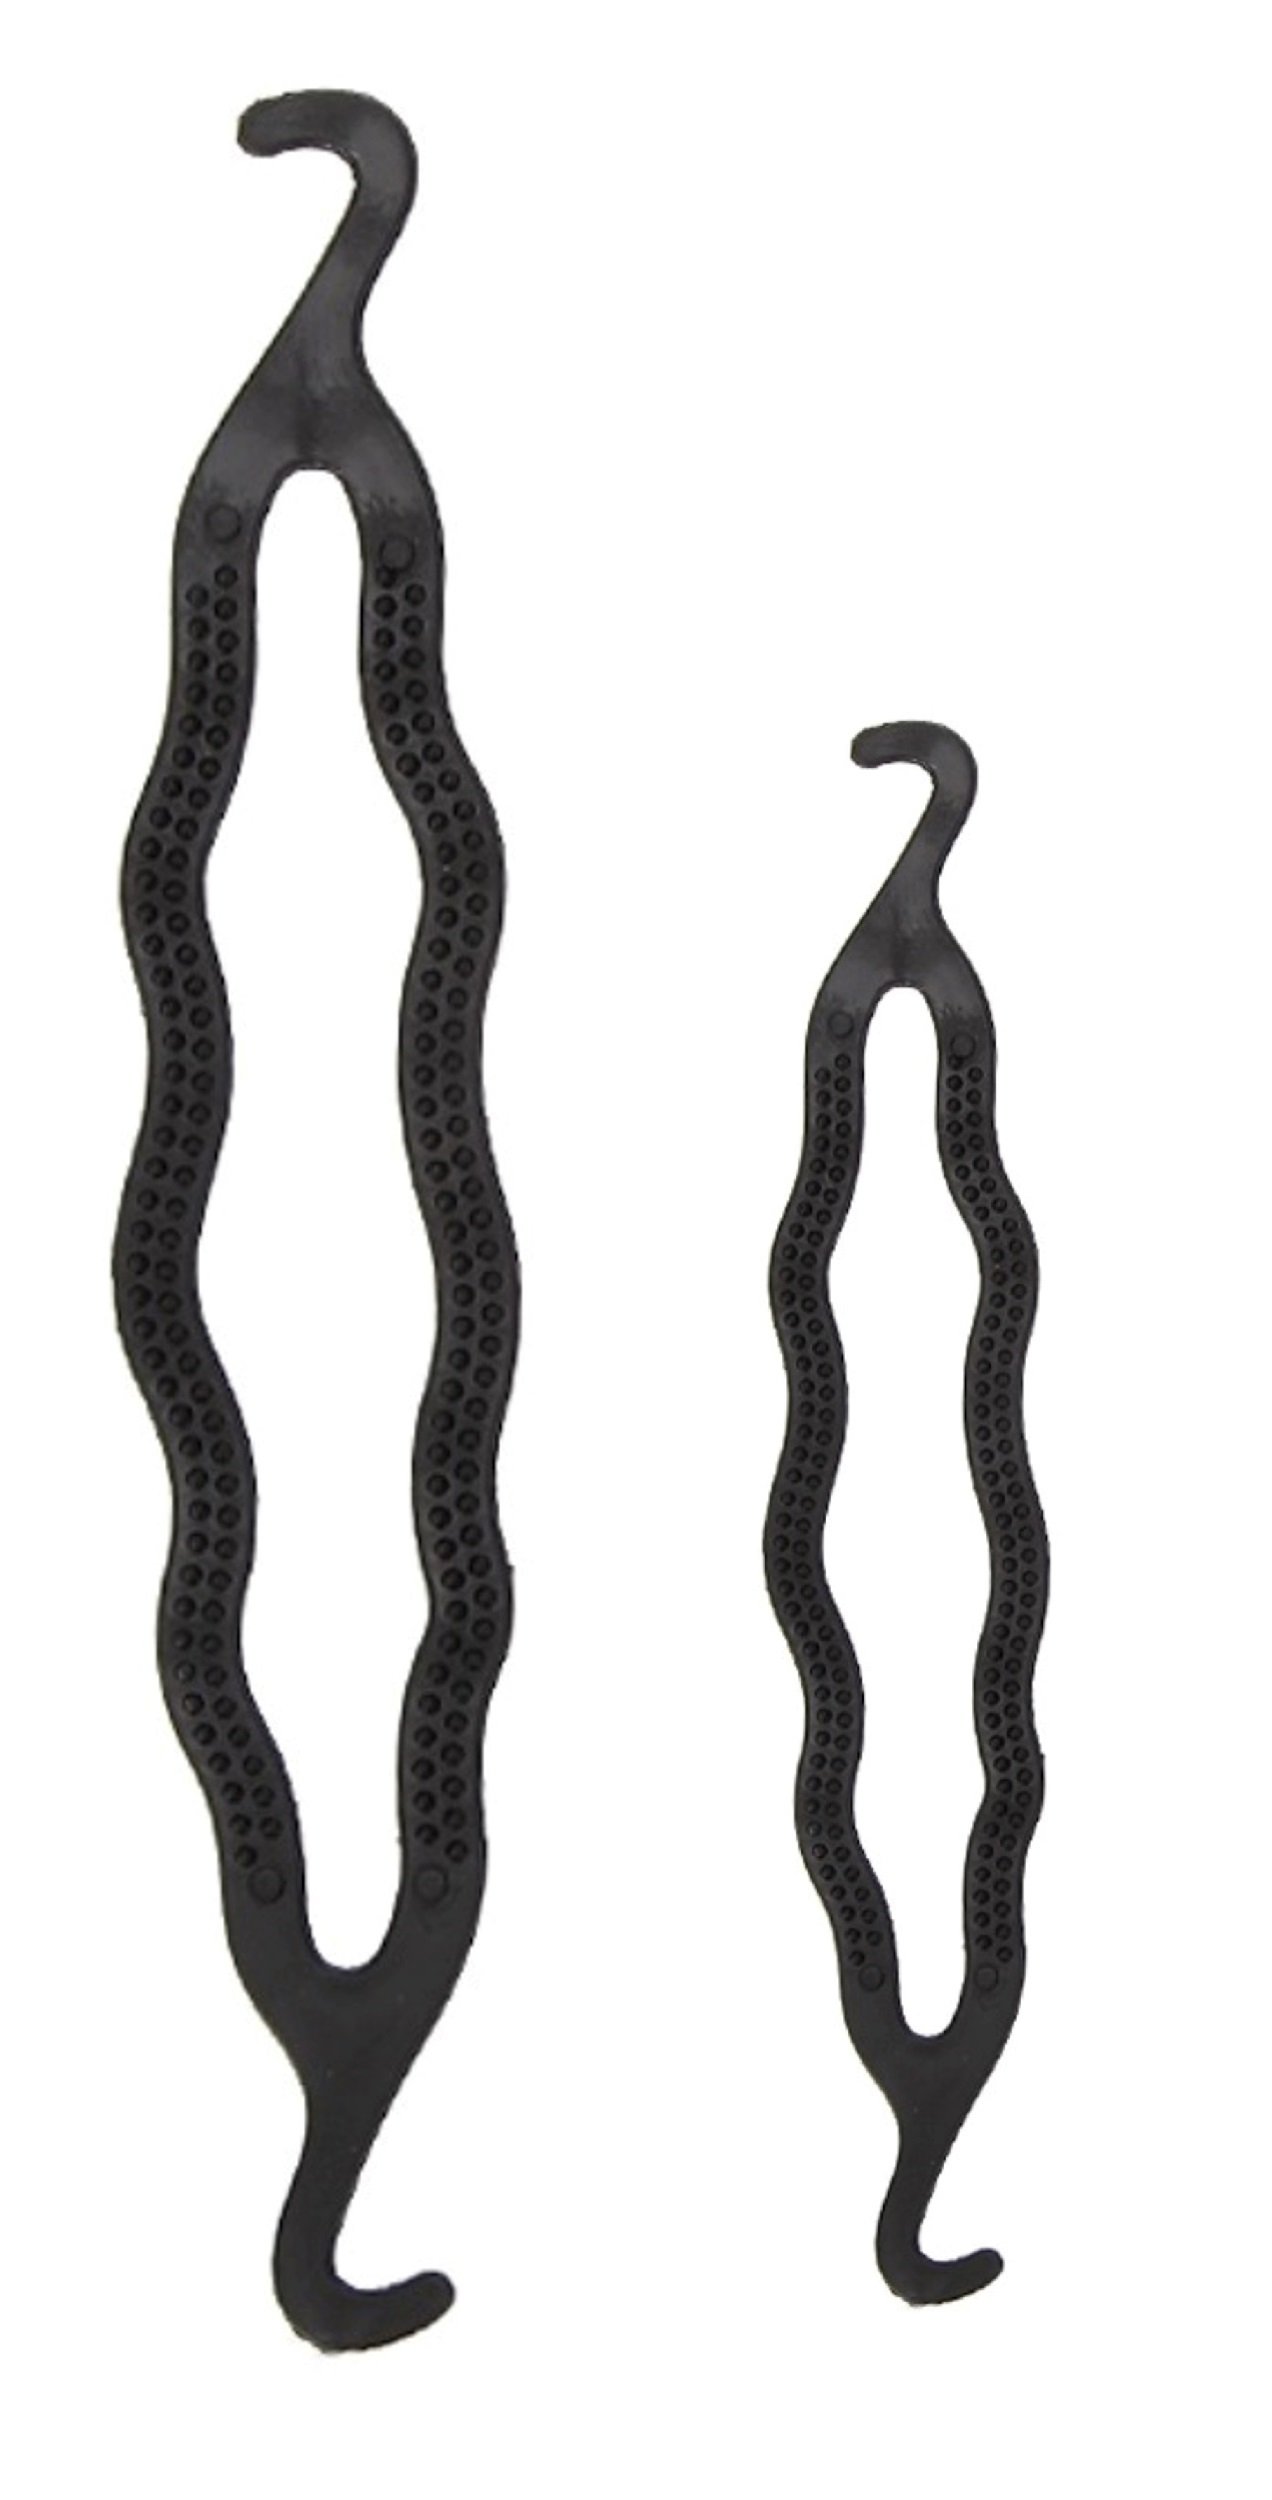 Hair Styling Clip Bun/Juda Maker Braid Tool 1 Big Size 1 Small Size (Pack of 2)